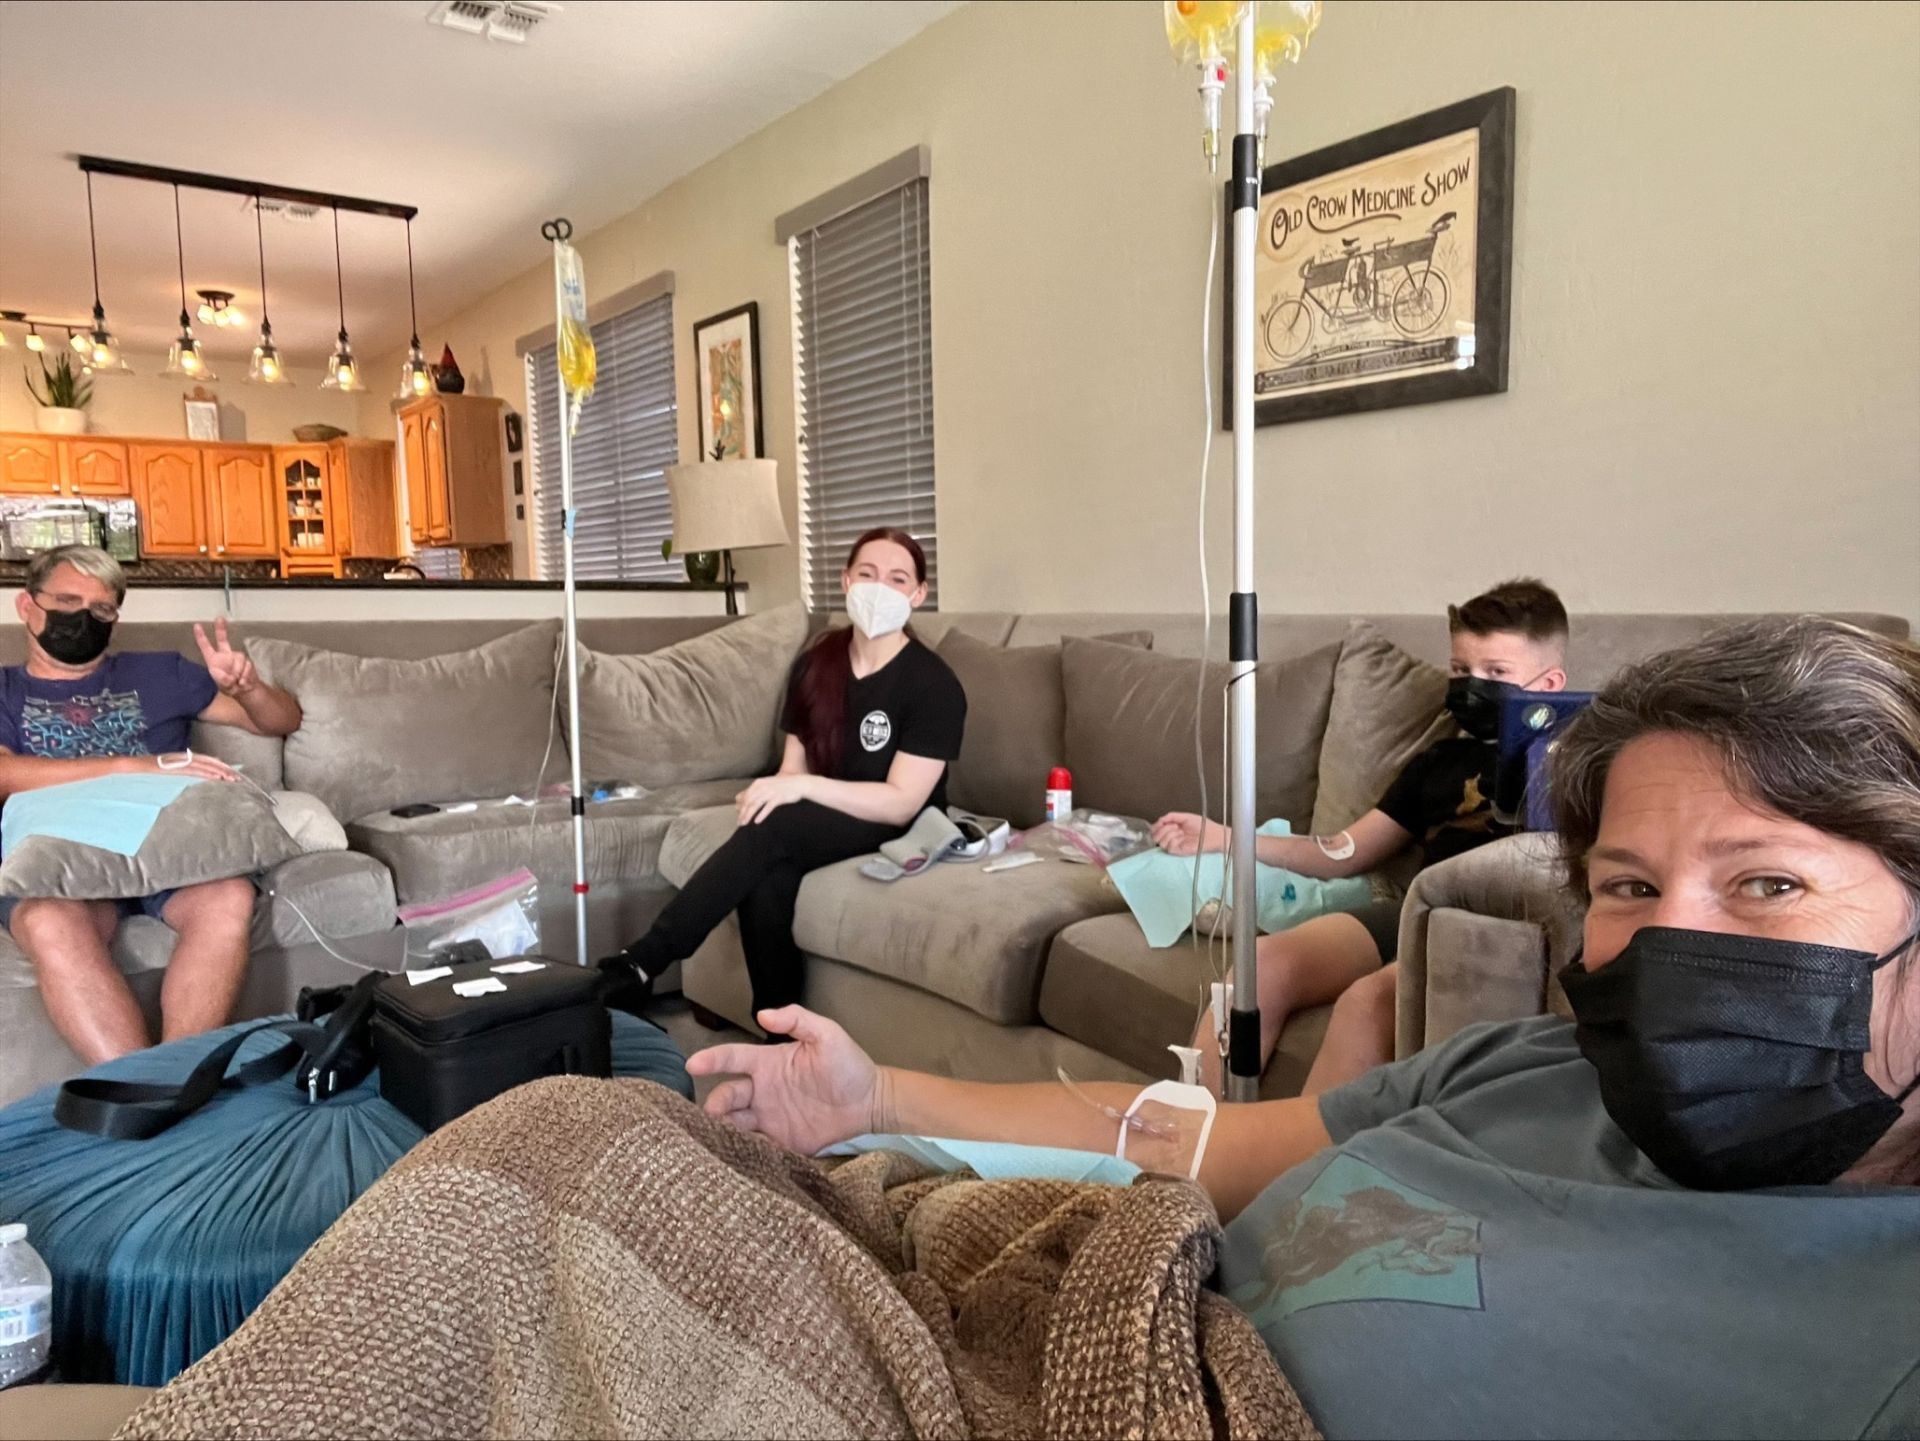 A group of people wearing face masks are sitting on a couch.